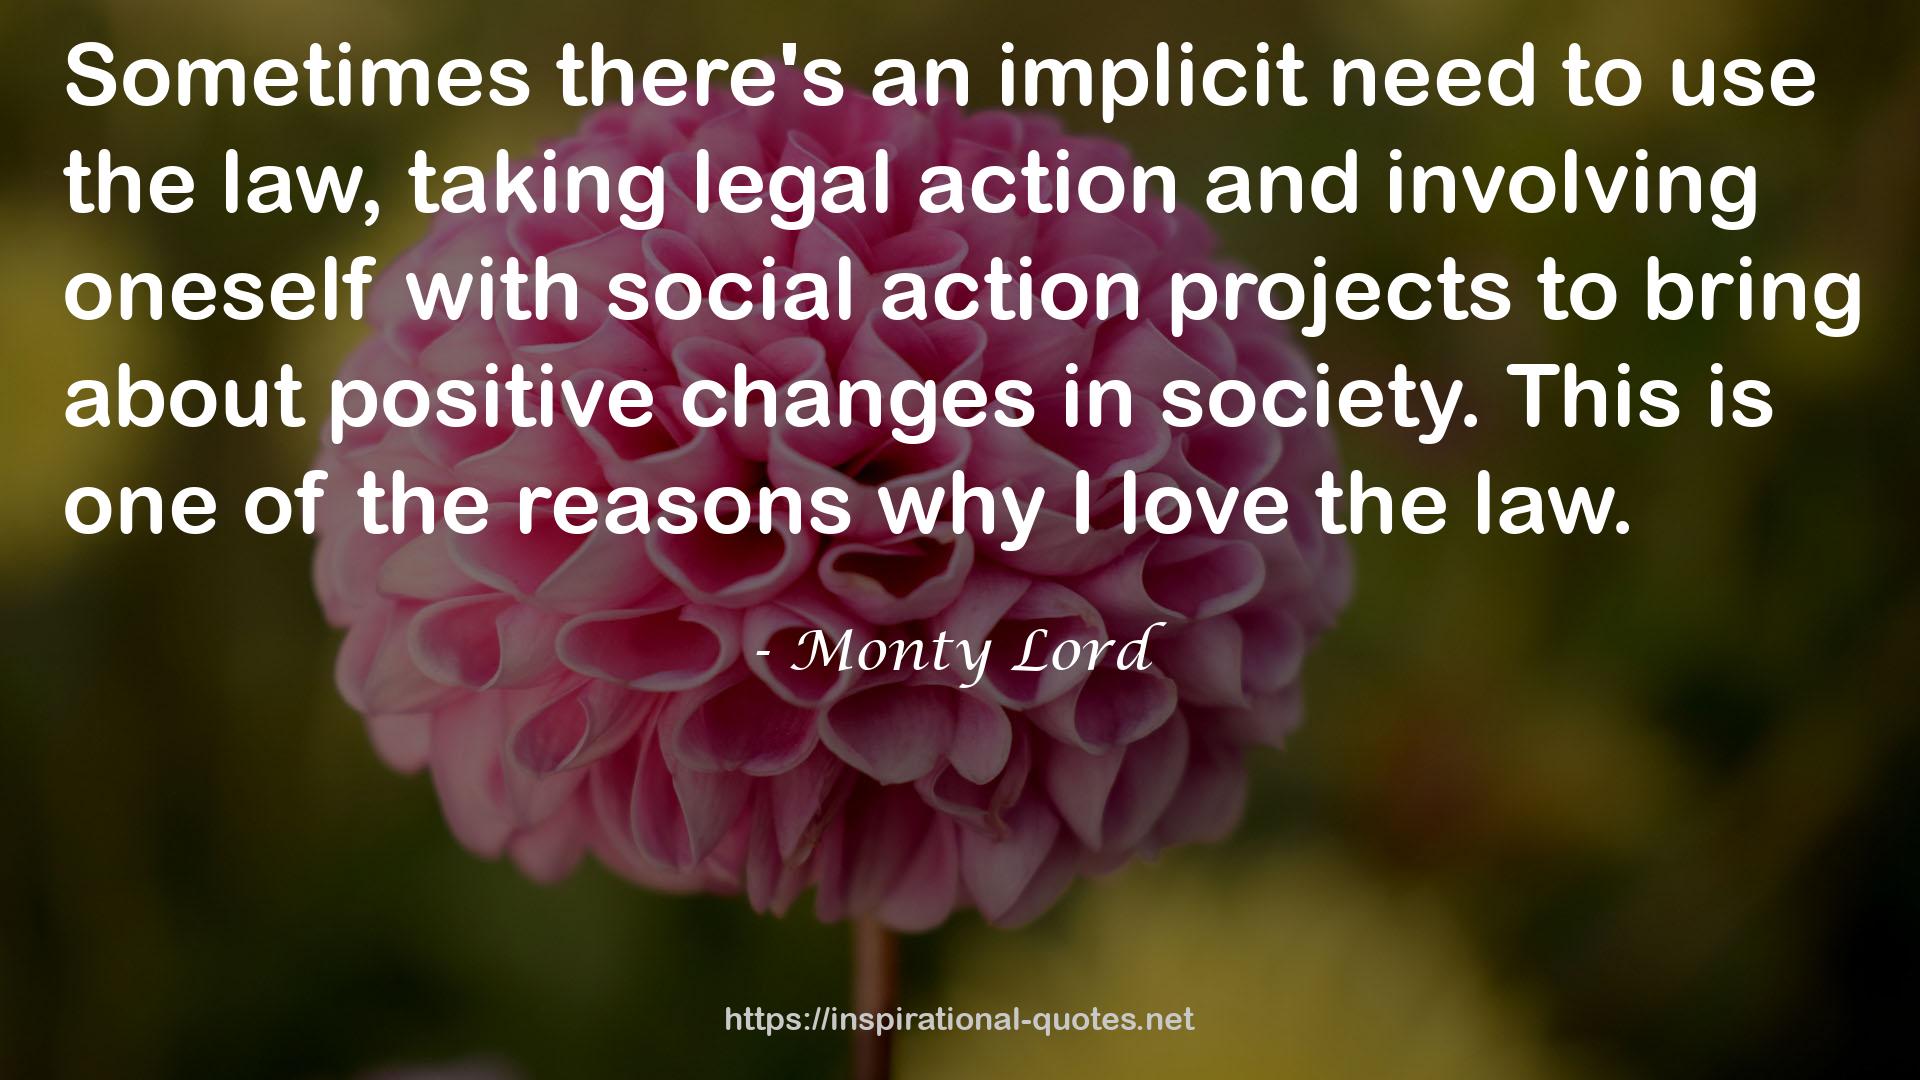 Monty Lord QUOTES